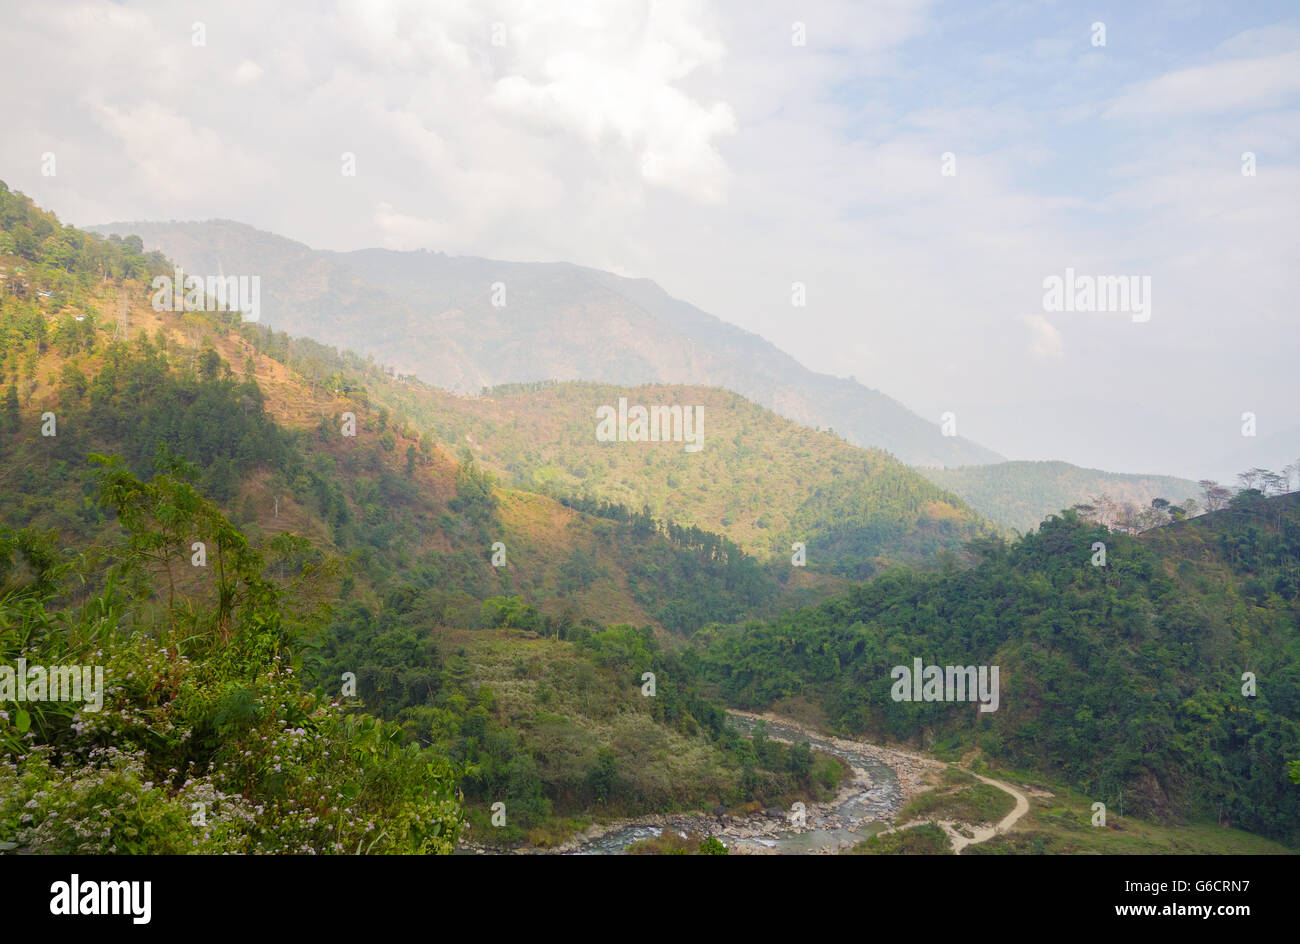 Beautiful view of hills and river Rangeet from Jamuni, Darjeeling, West Bengal, India Stock Photo